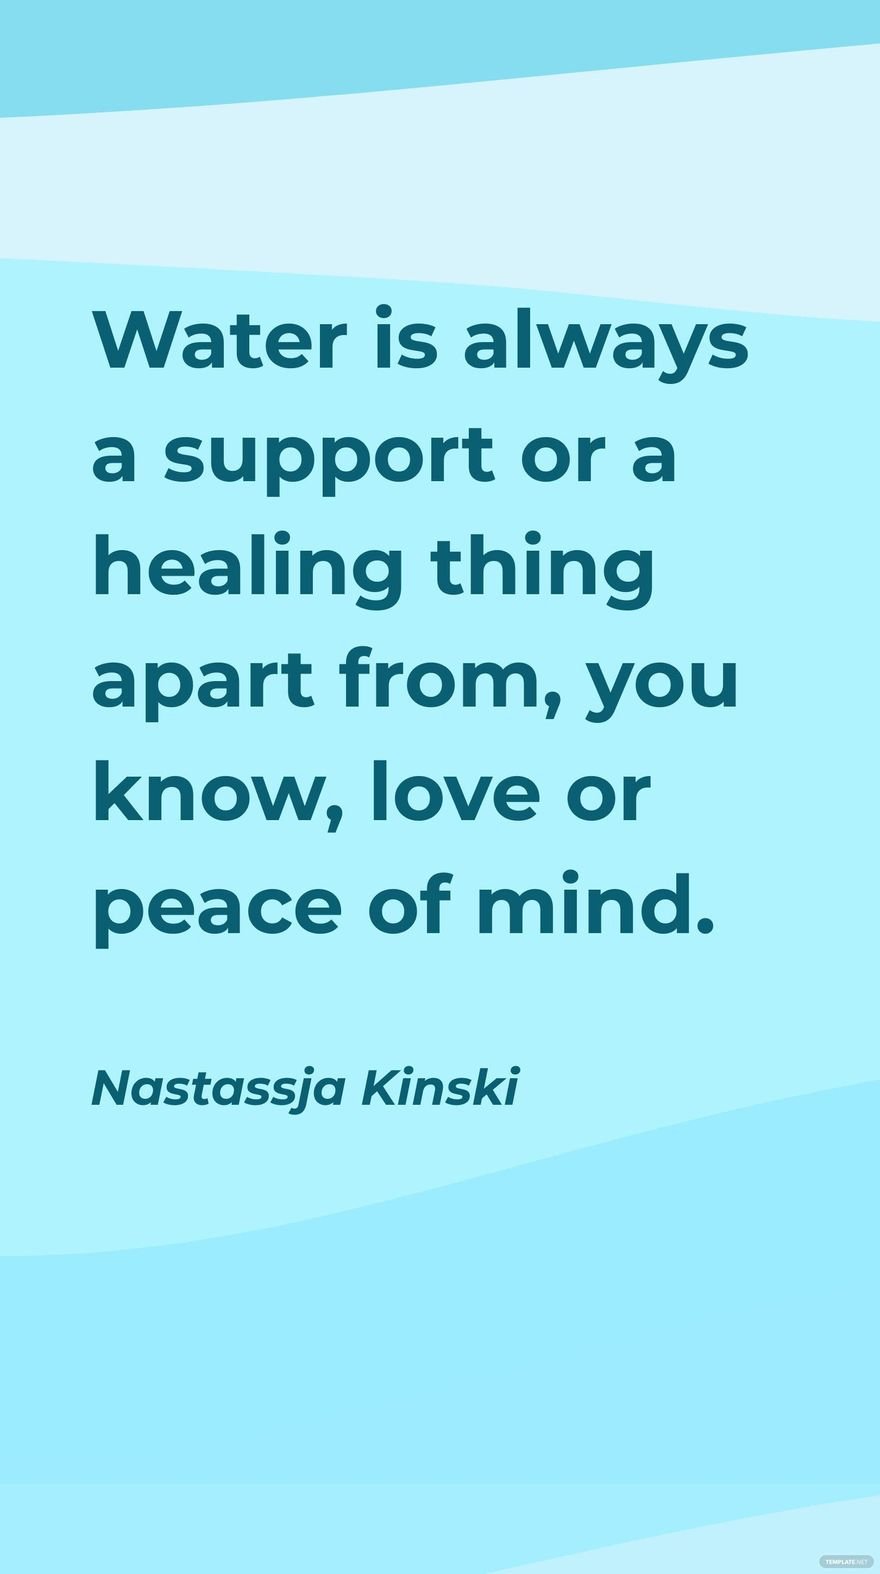 Free Nastassja Kinski - Water is always a support or a healing thing apart from, you know, love or peace of mind. in JPG